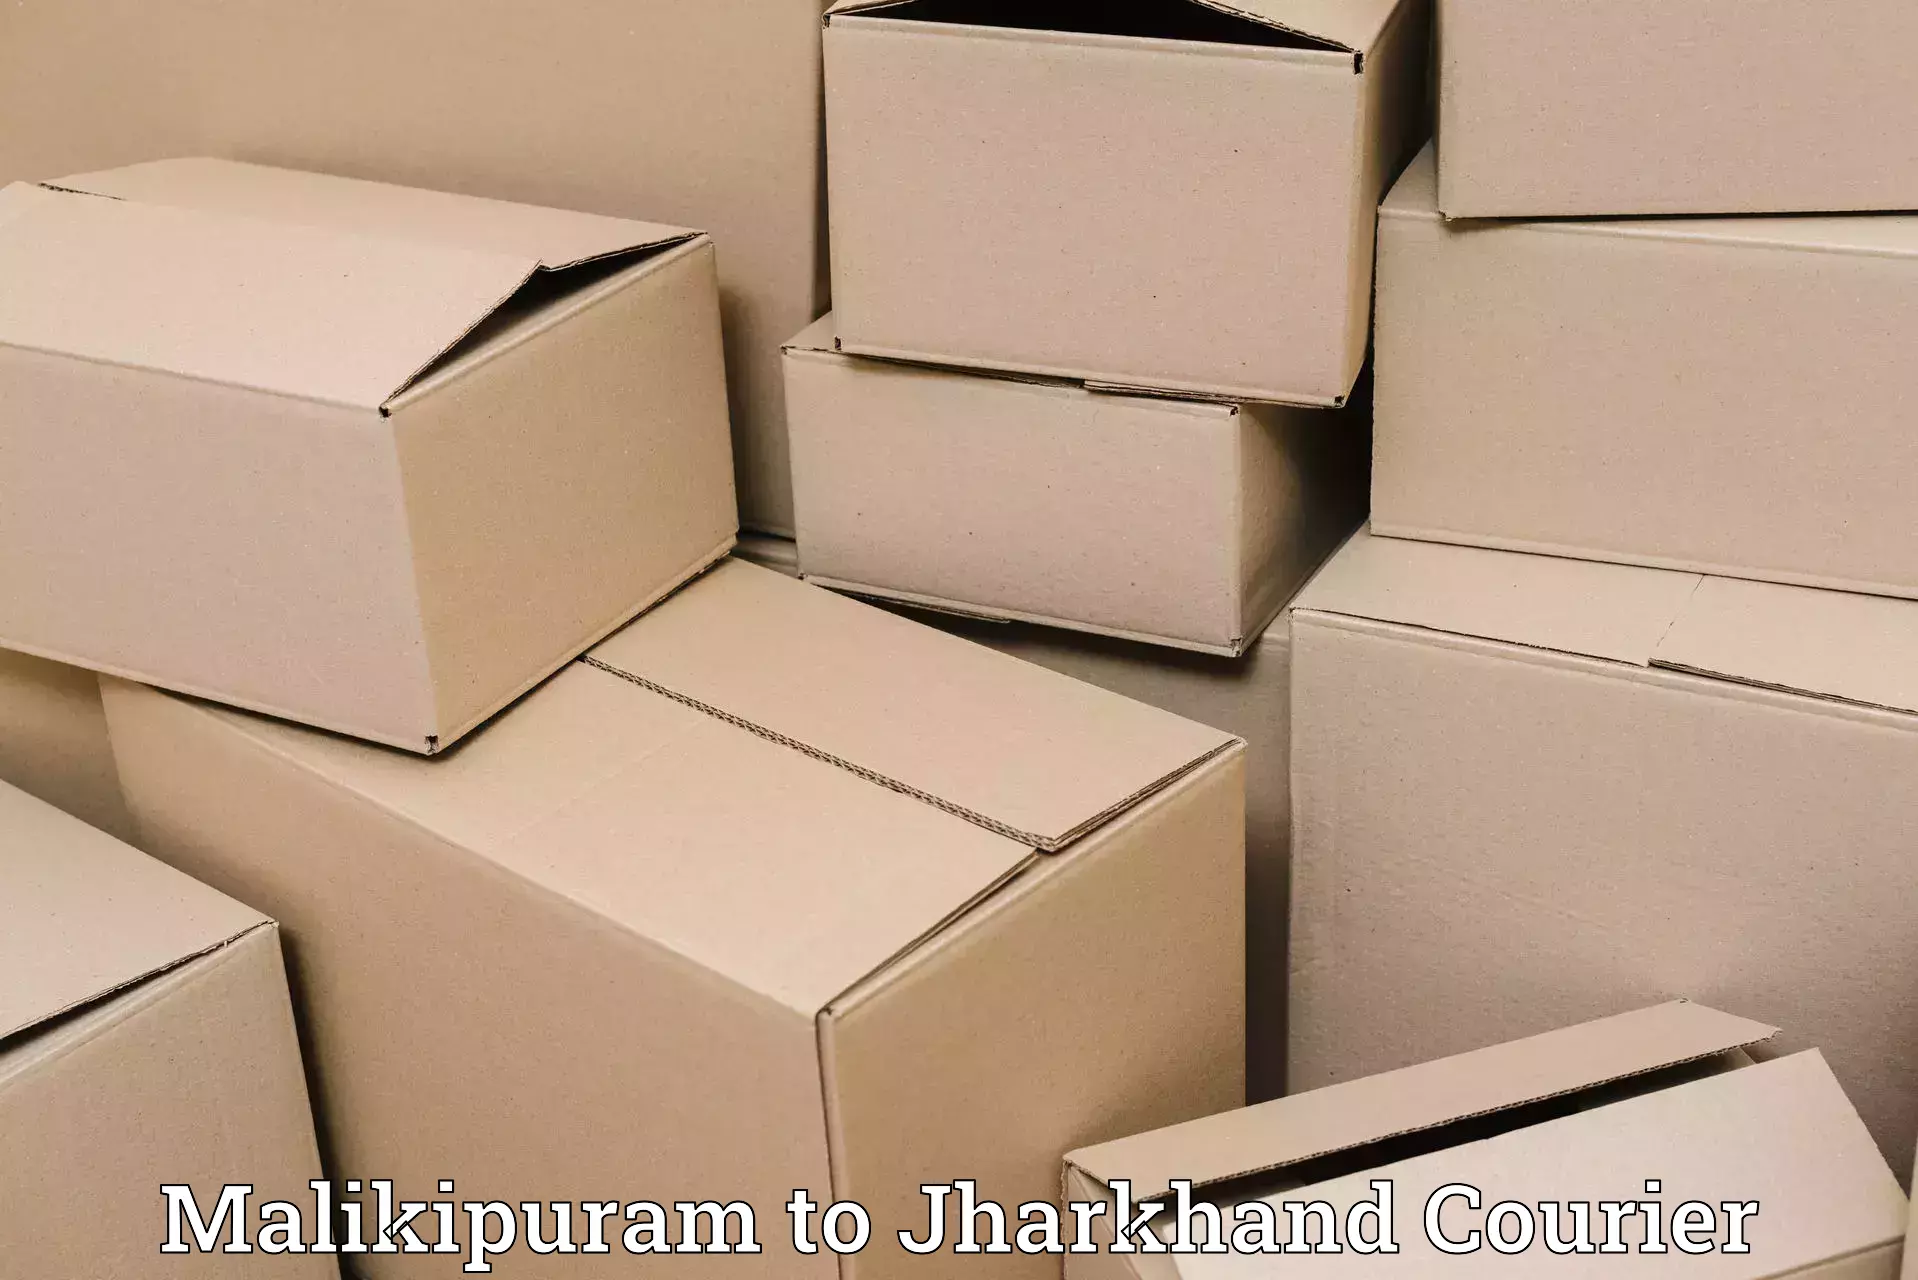 24-hour courier services Malikipuram to Domchanch